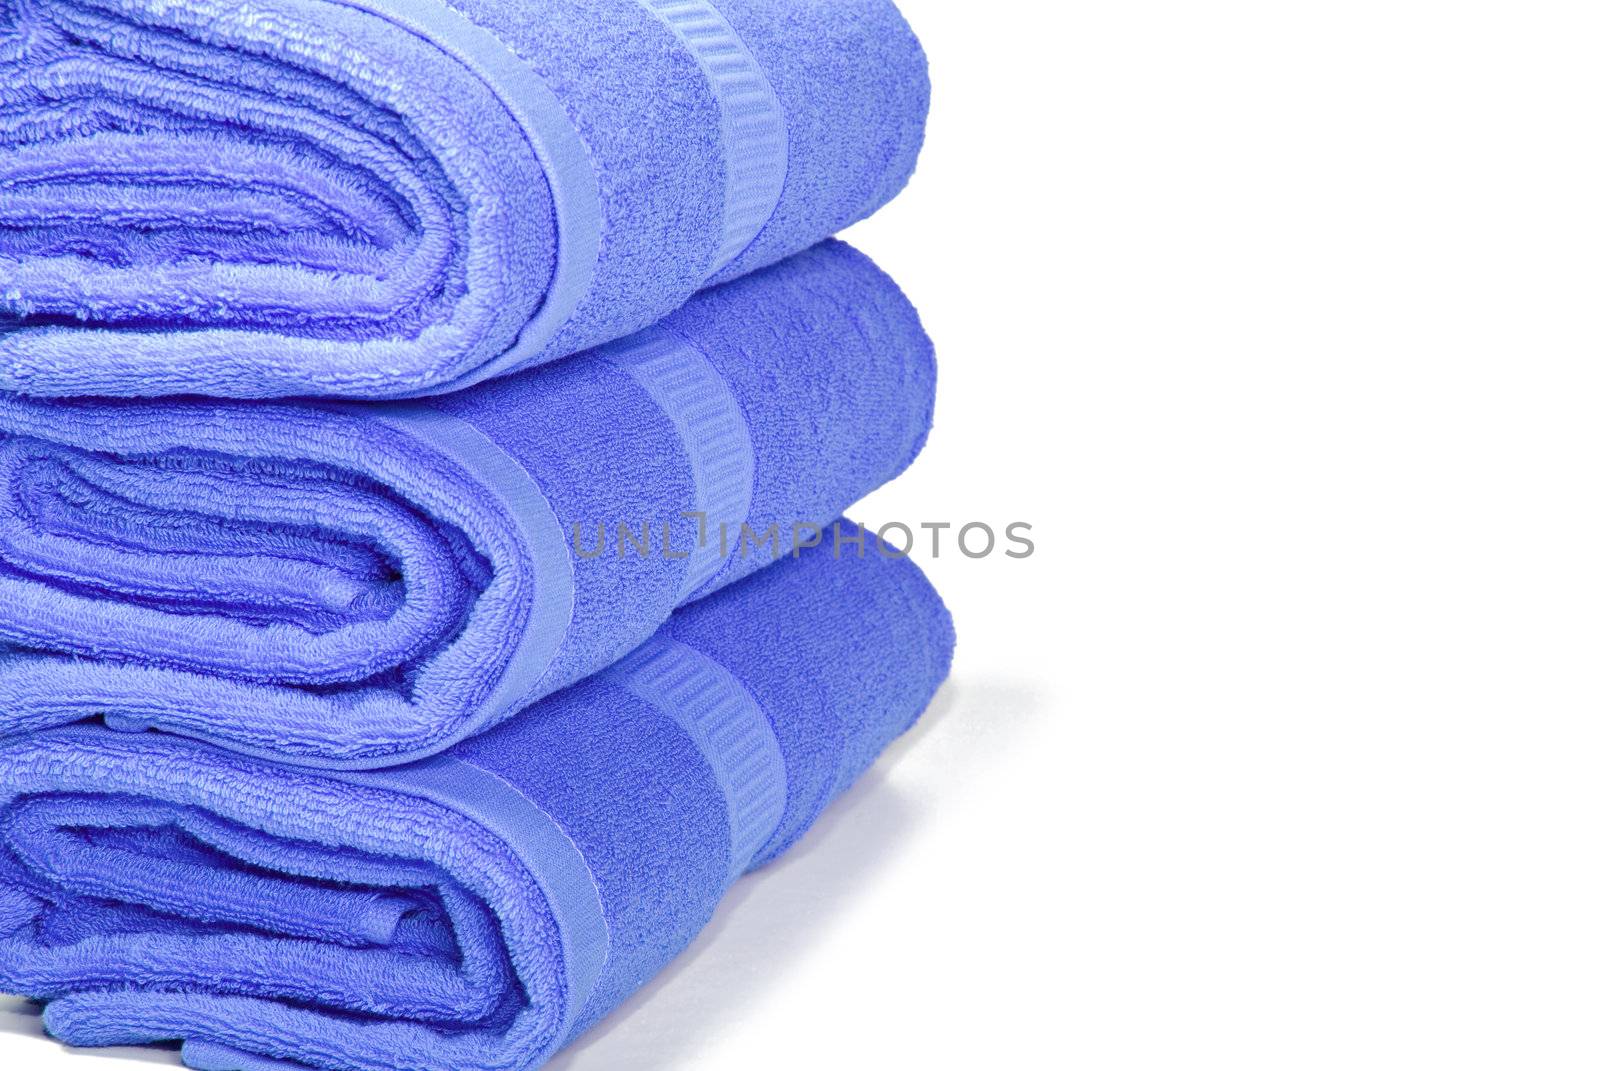 Three blue towels on a white with space for text by tish1